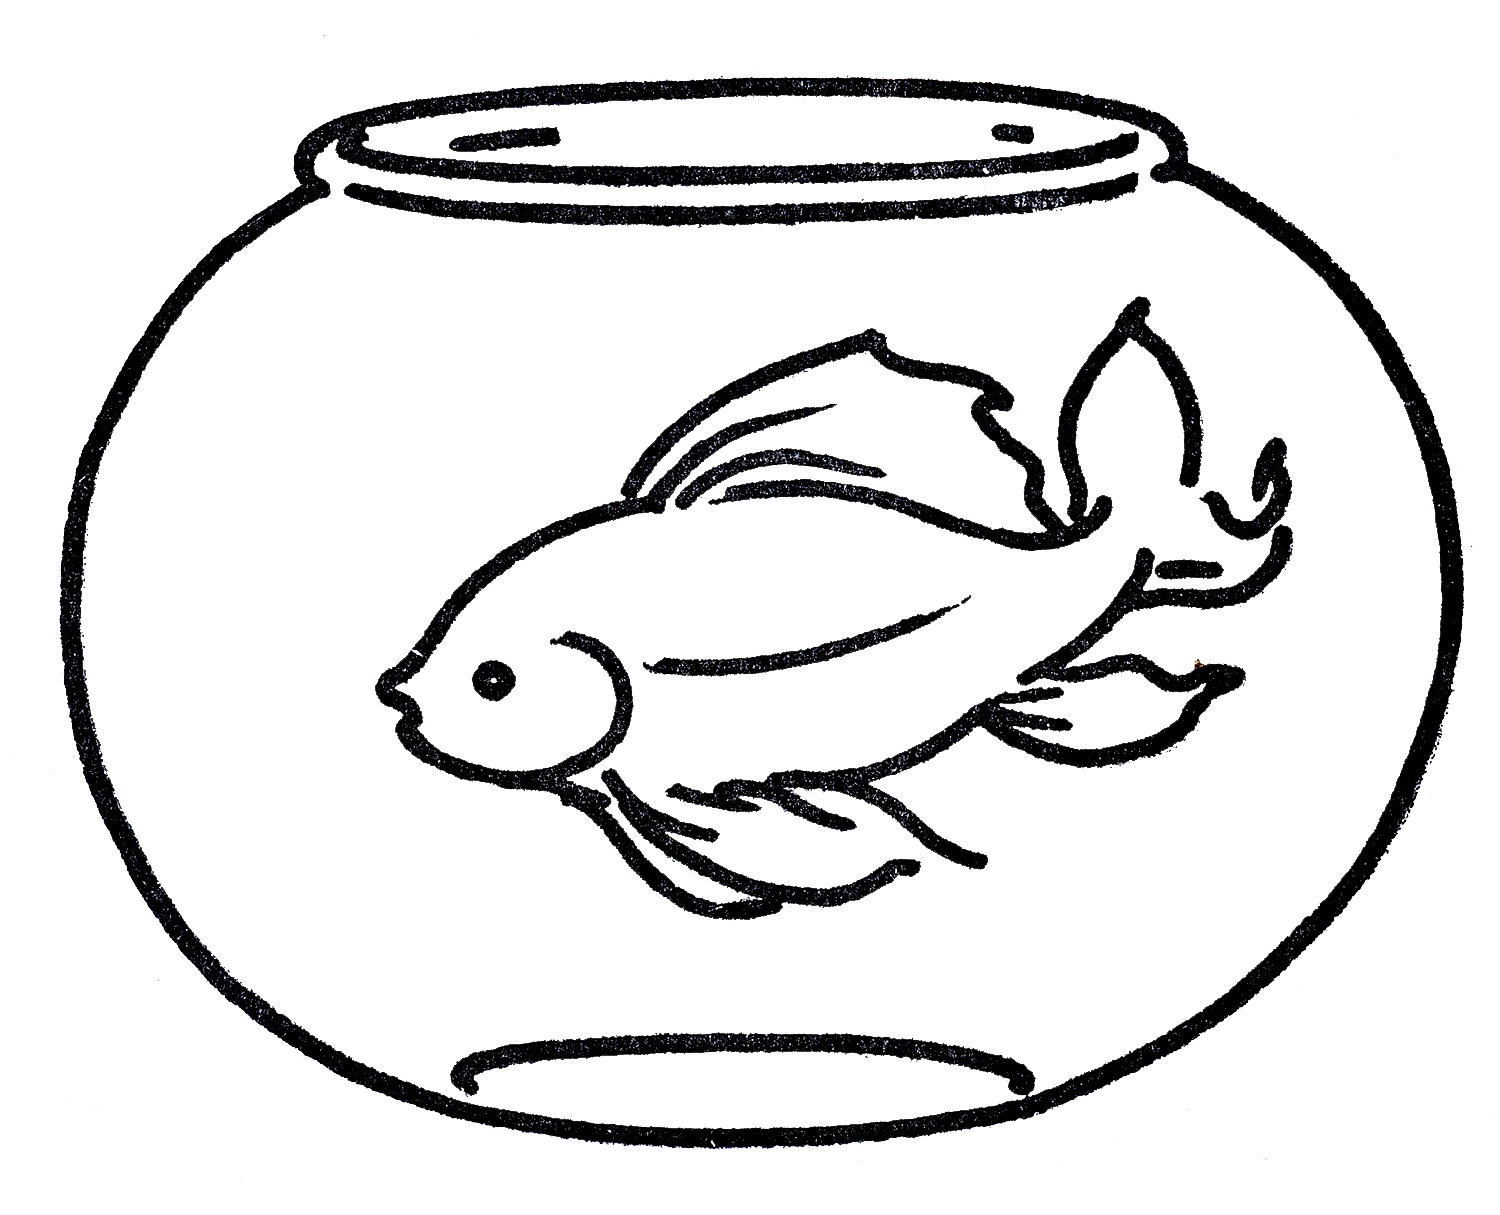 Free Clipart Goldfish in Bowl - Line Art - The Graphics Fairy